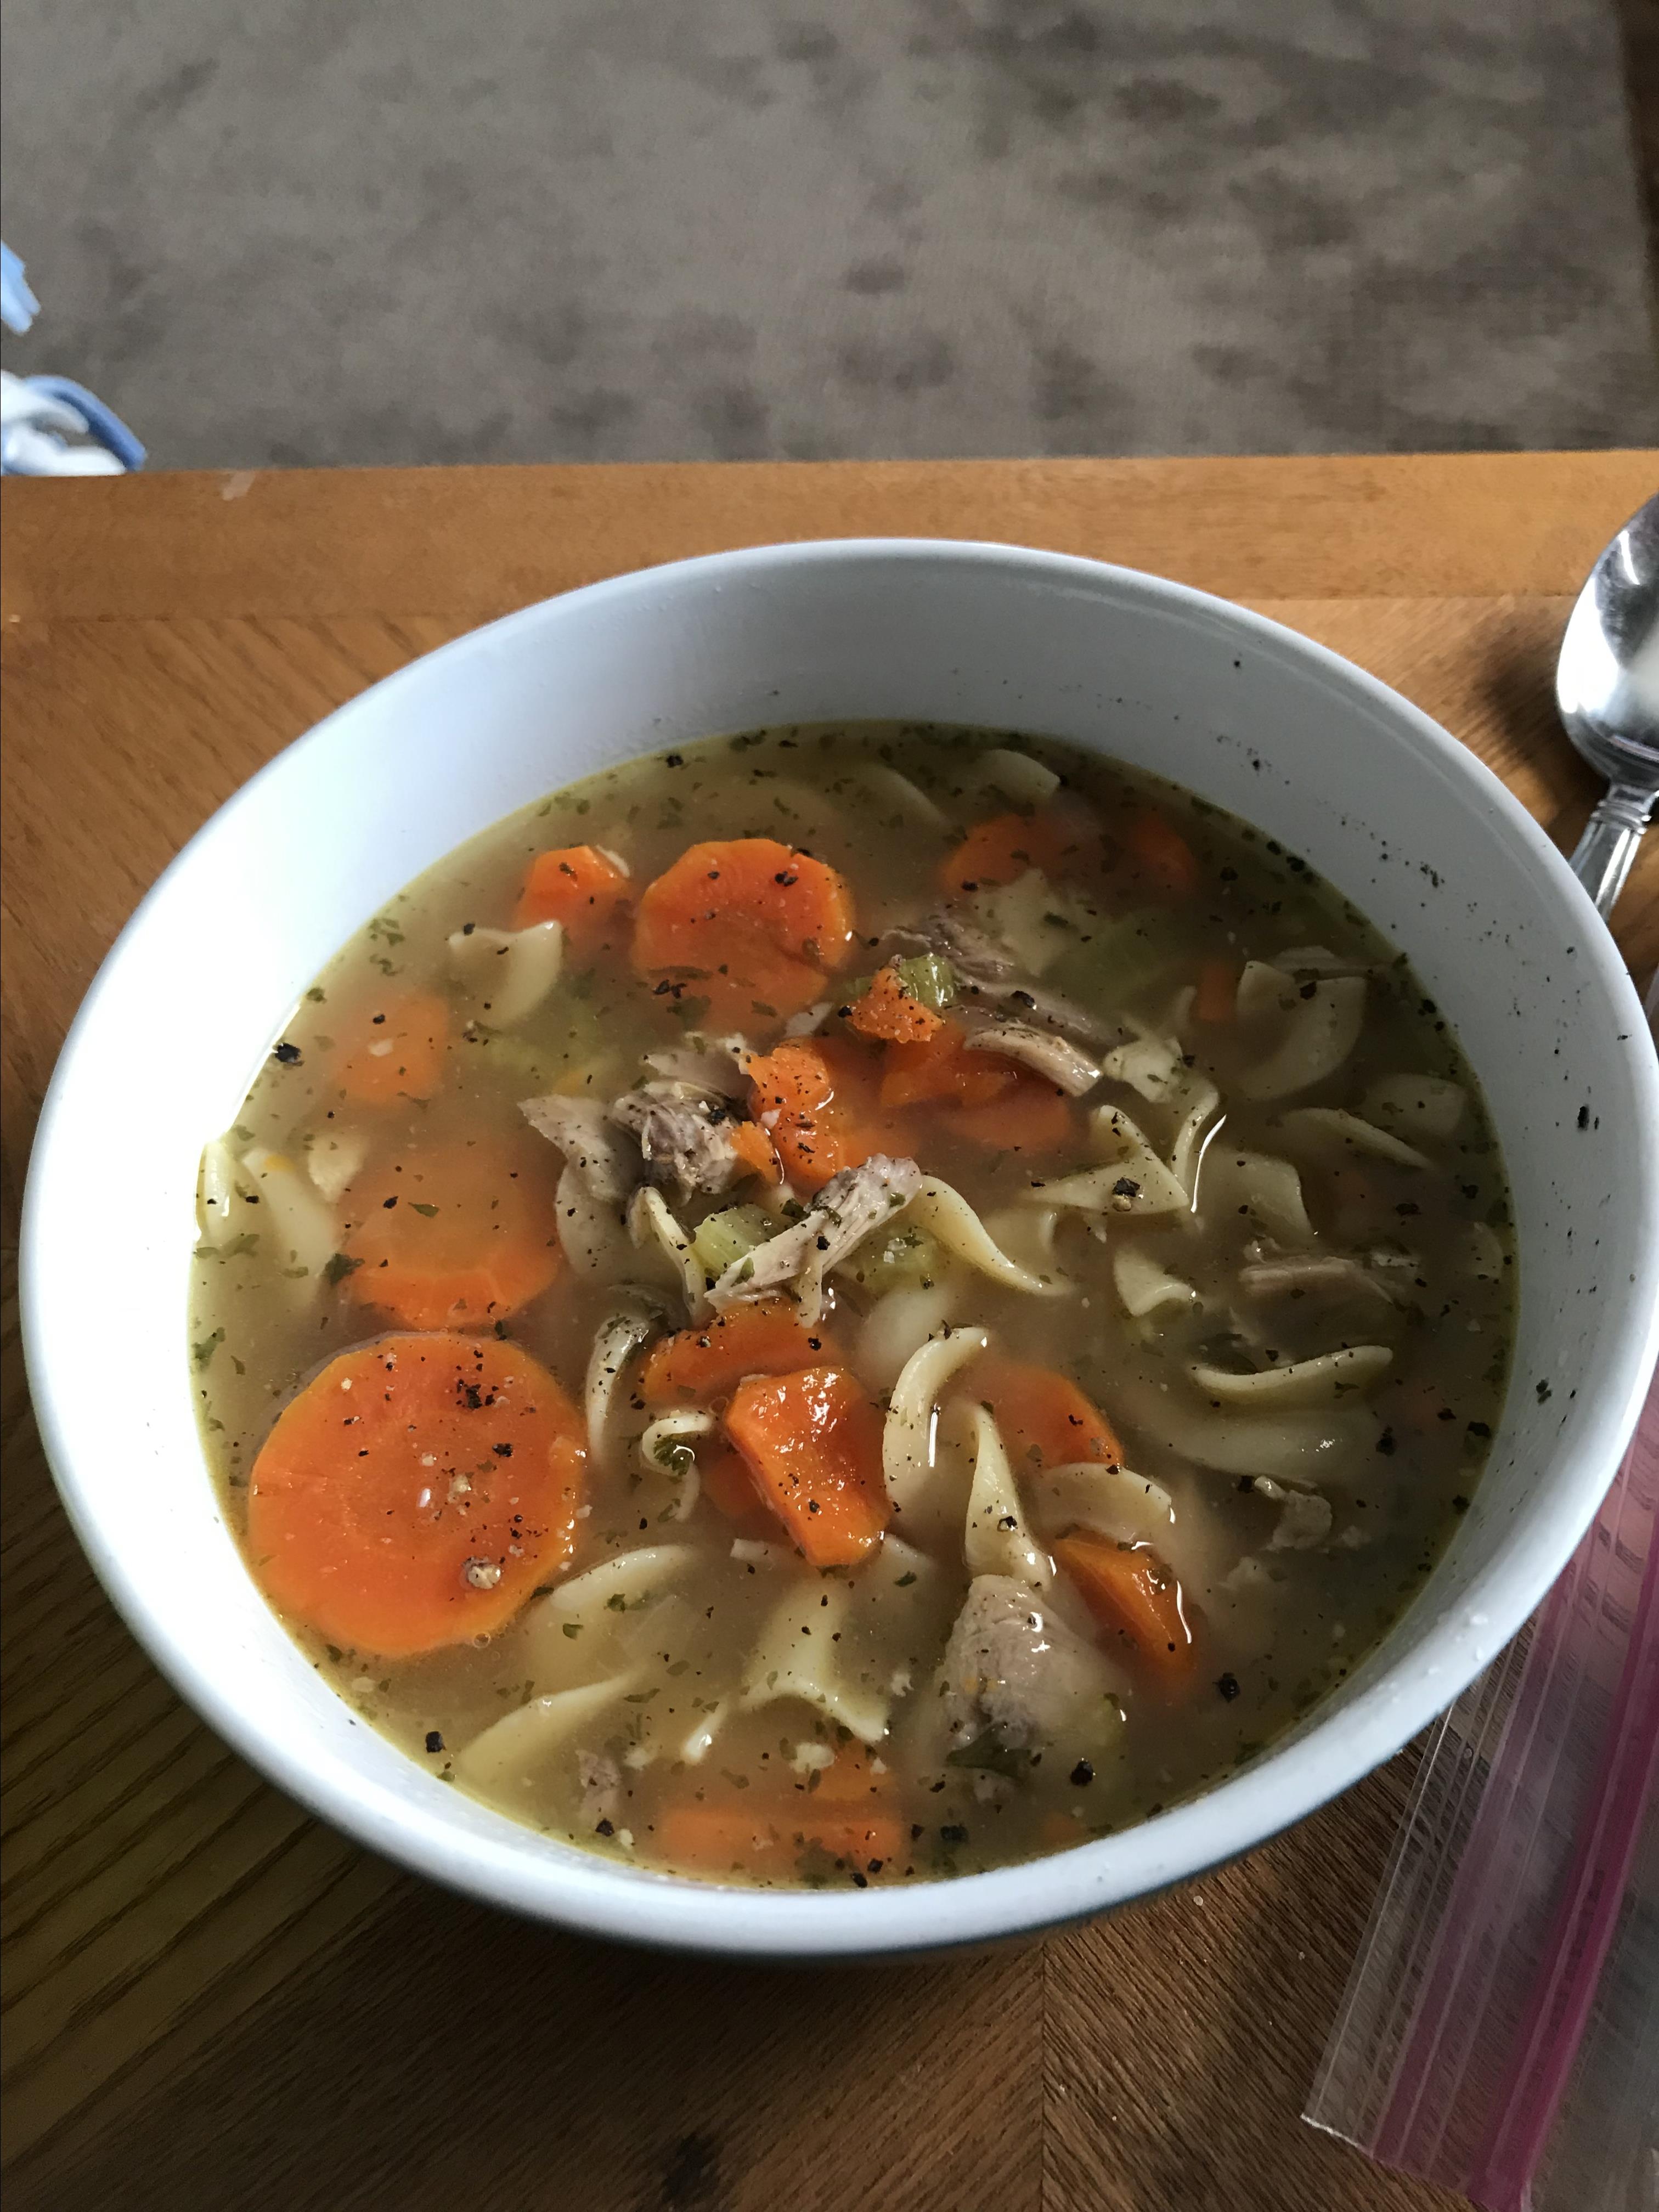 Quick and Easy Instant Pot® Chicken Noodle Soup